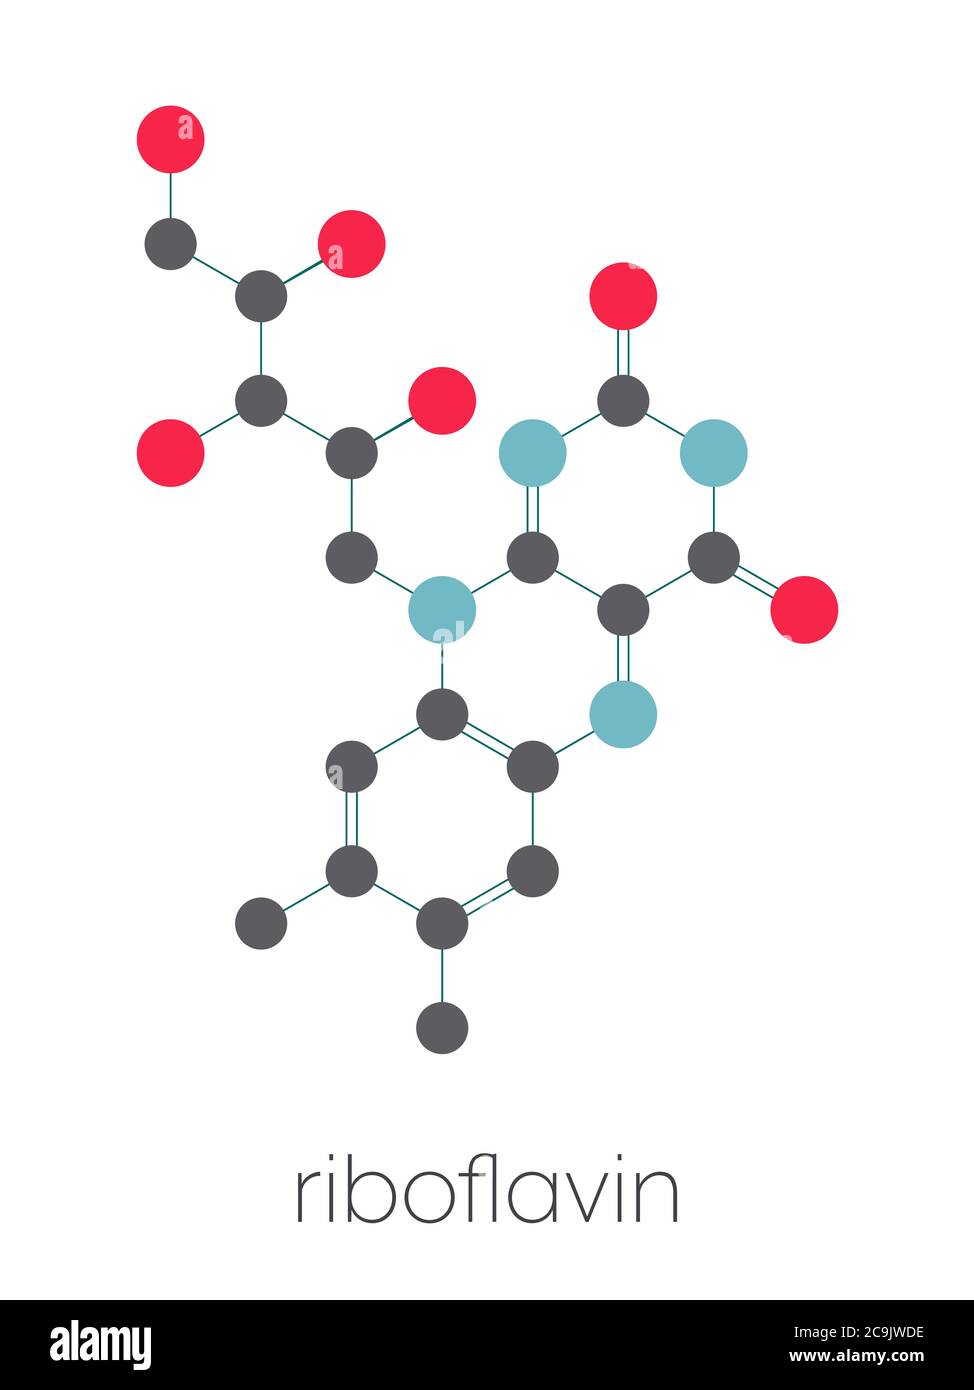 Vitamin B2 (riboflavin) molecule. Stylized skeletal formula (chemical structure). Atoms are shown as color-coded circles connected by thin bonds, on a Stock Photo